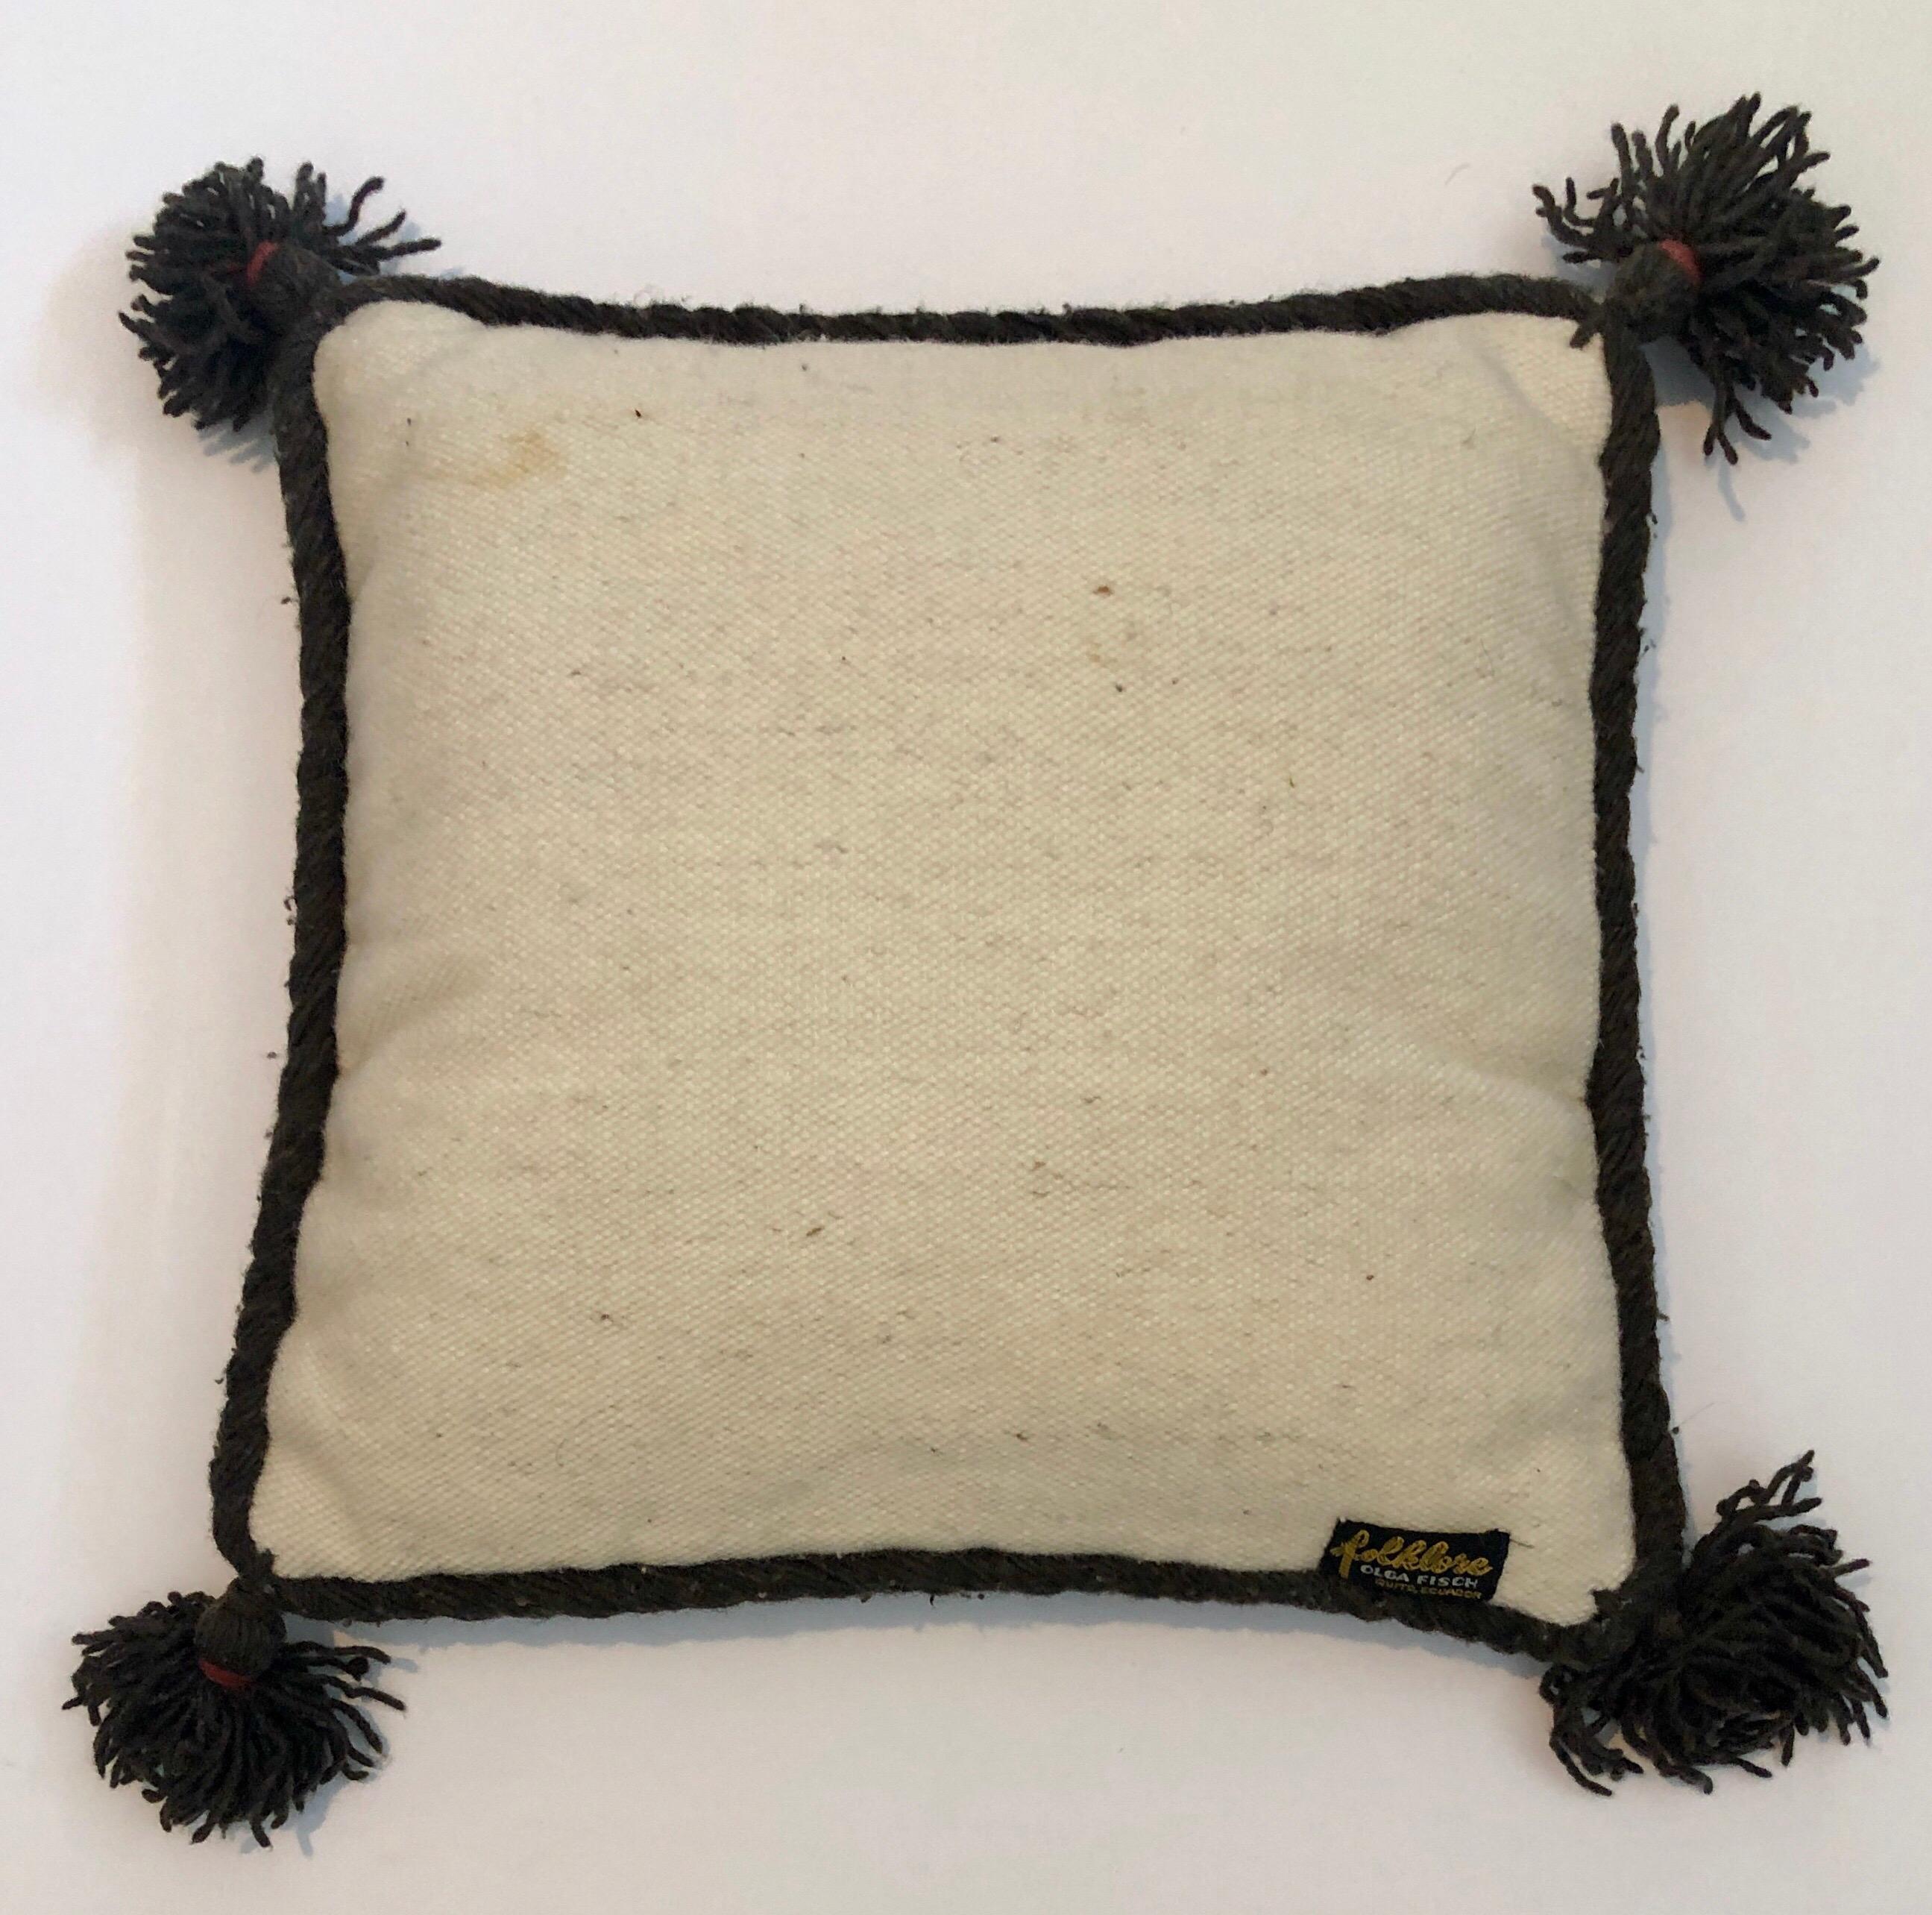 Olga Fisch was born in Hungary, studied in Germany and lived in Morocco and Ethiopia before receiving asylum as a Jewish refugee in Ecuador in 1939. For her Indian-inspired designs, Mrs. Fisch uses natural black and white sheep's wool colored with